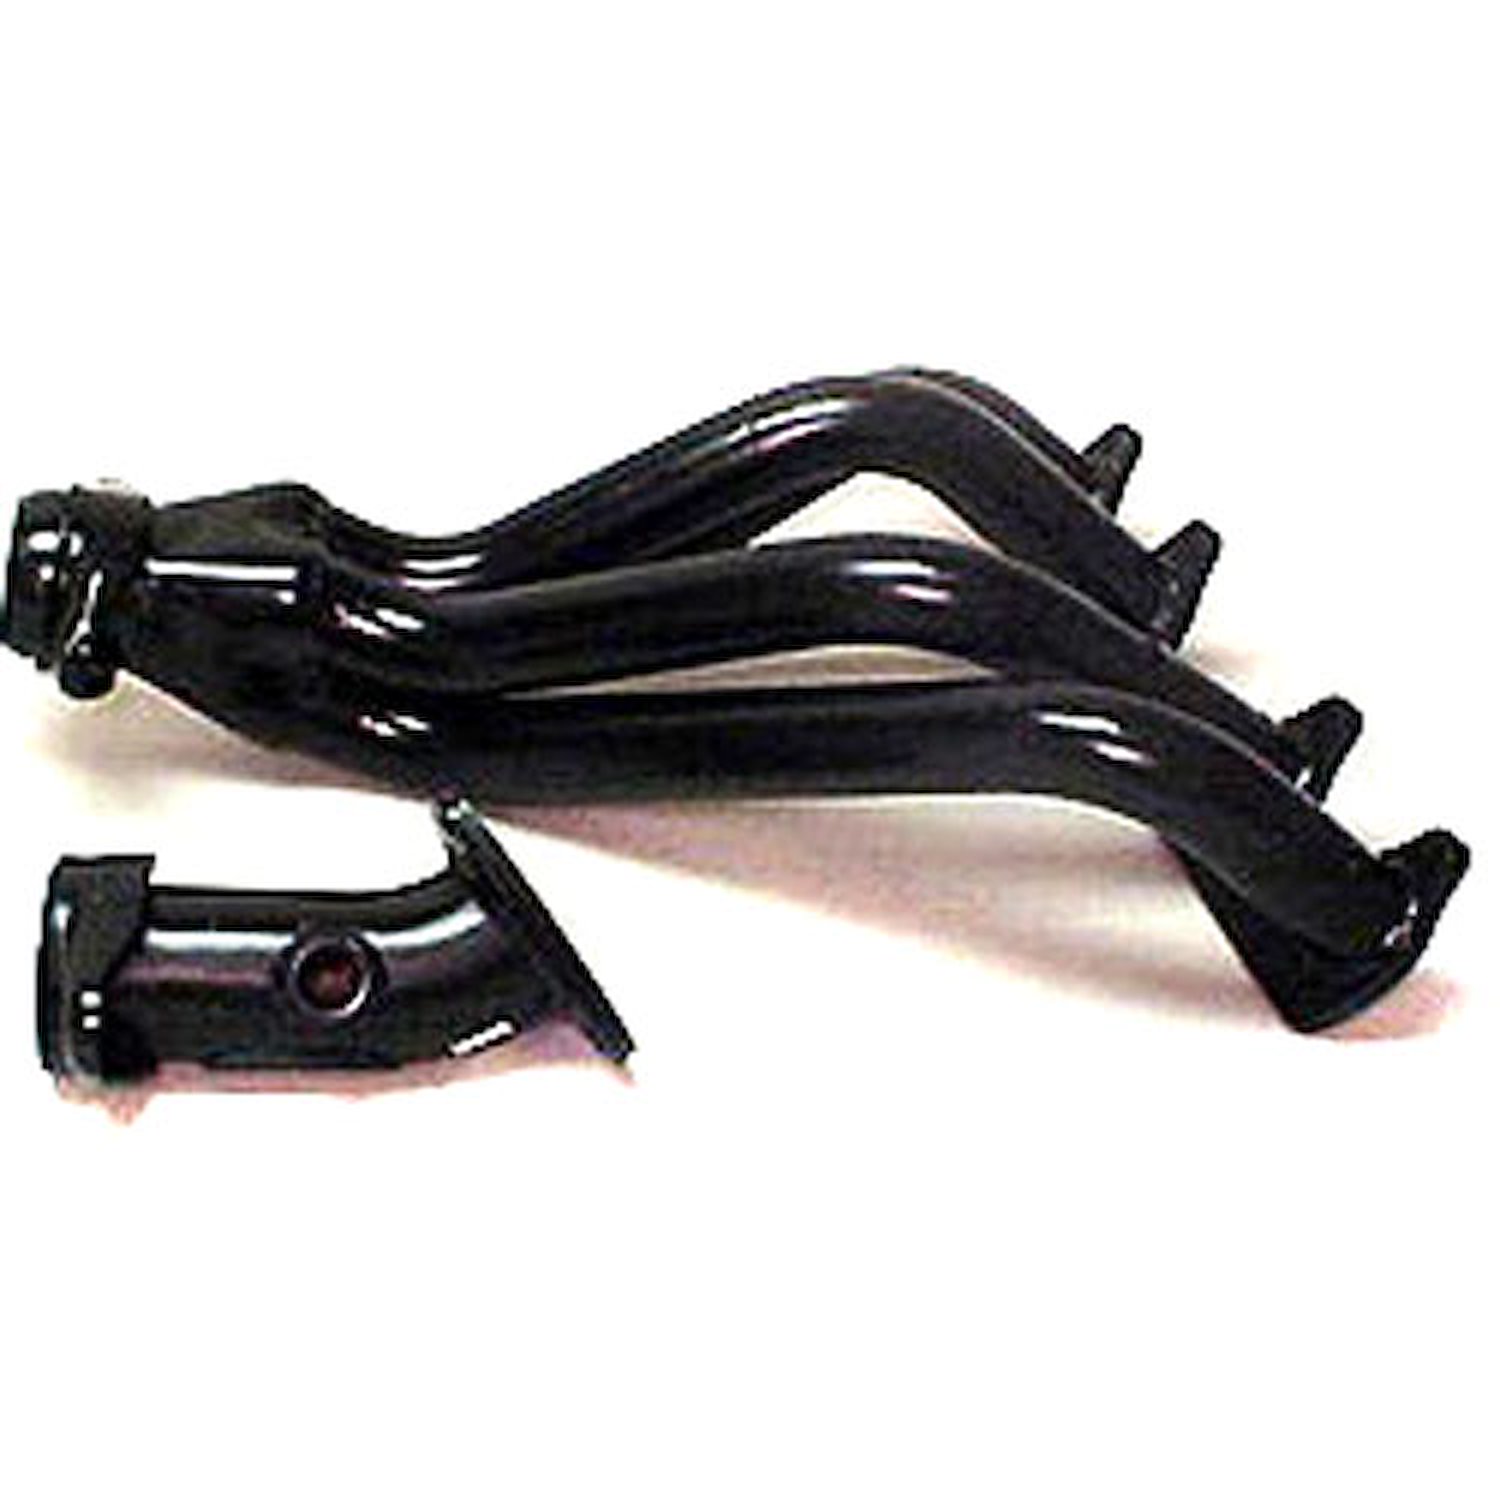 Painted Car Headers 1993-99 Golf/Jetta III 2.0L without Air Injection